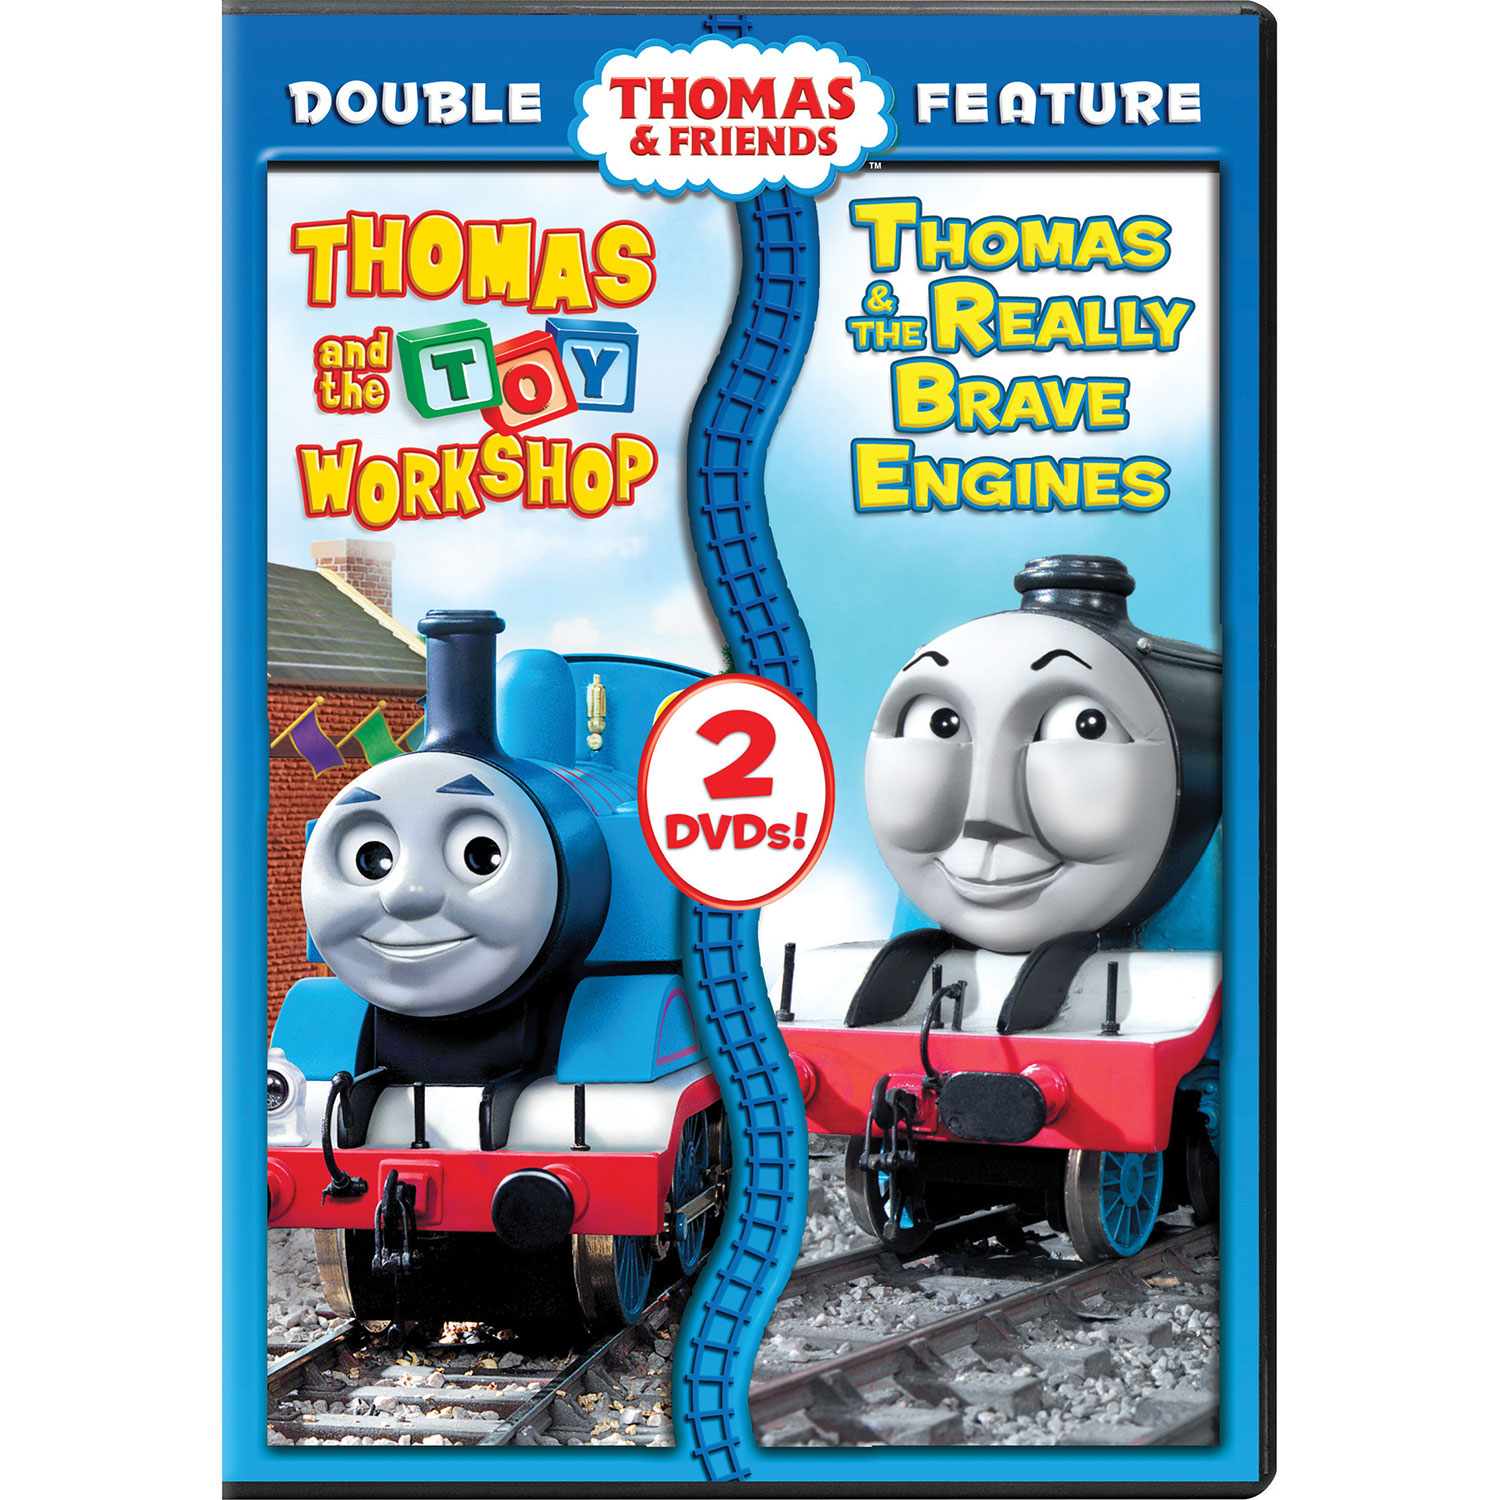 Thomas & Friends: Thomas and the Toy Workshop/ Thomas & the Really Brave Engines